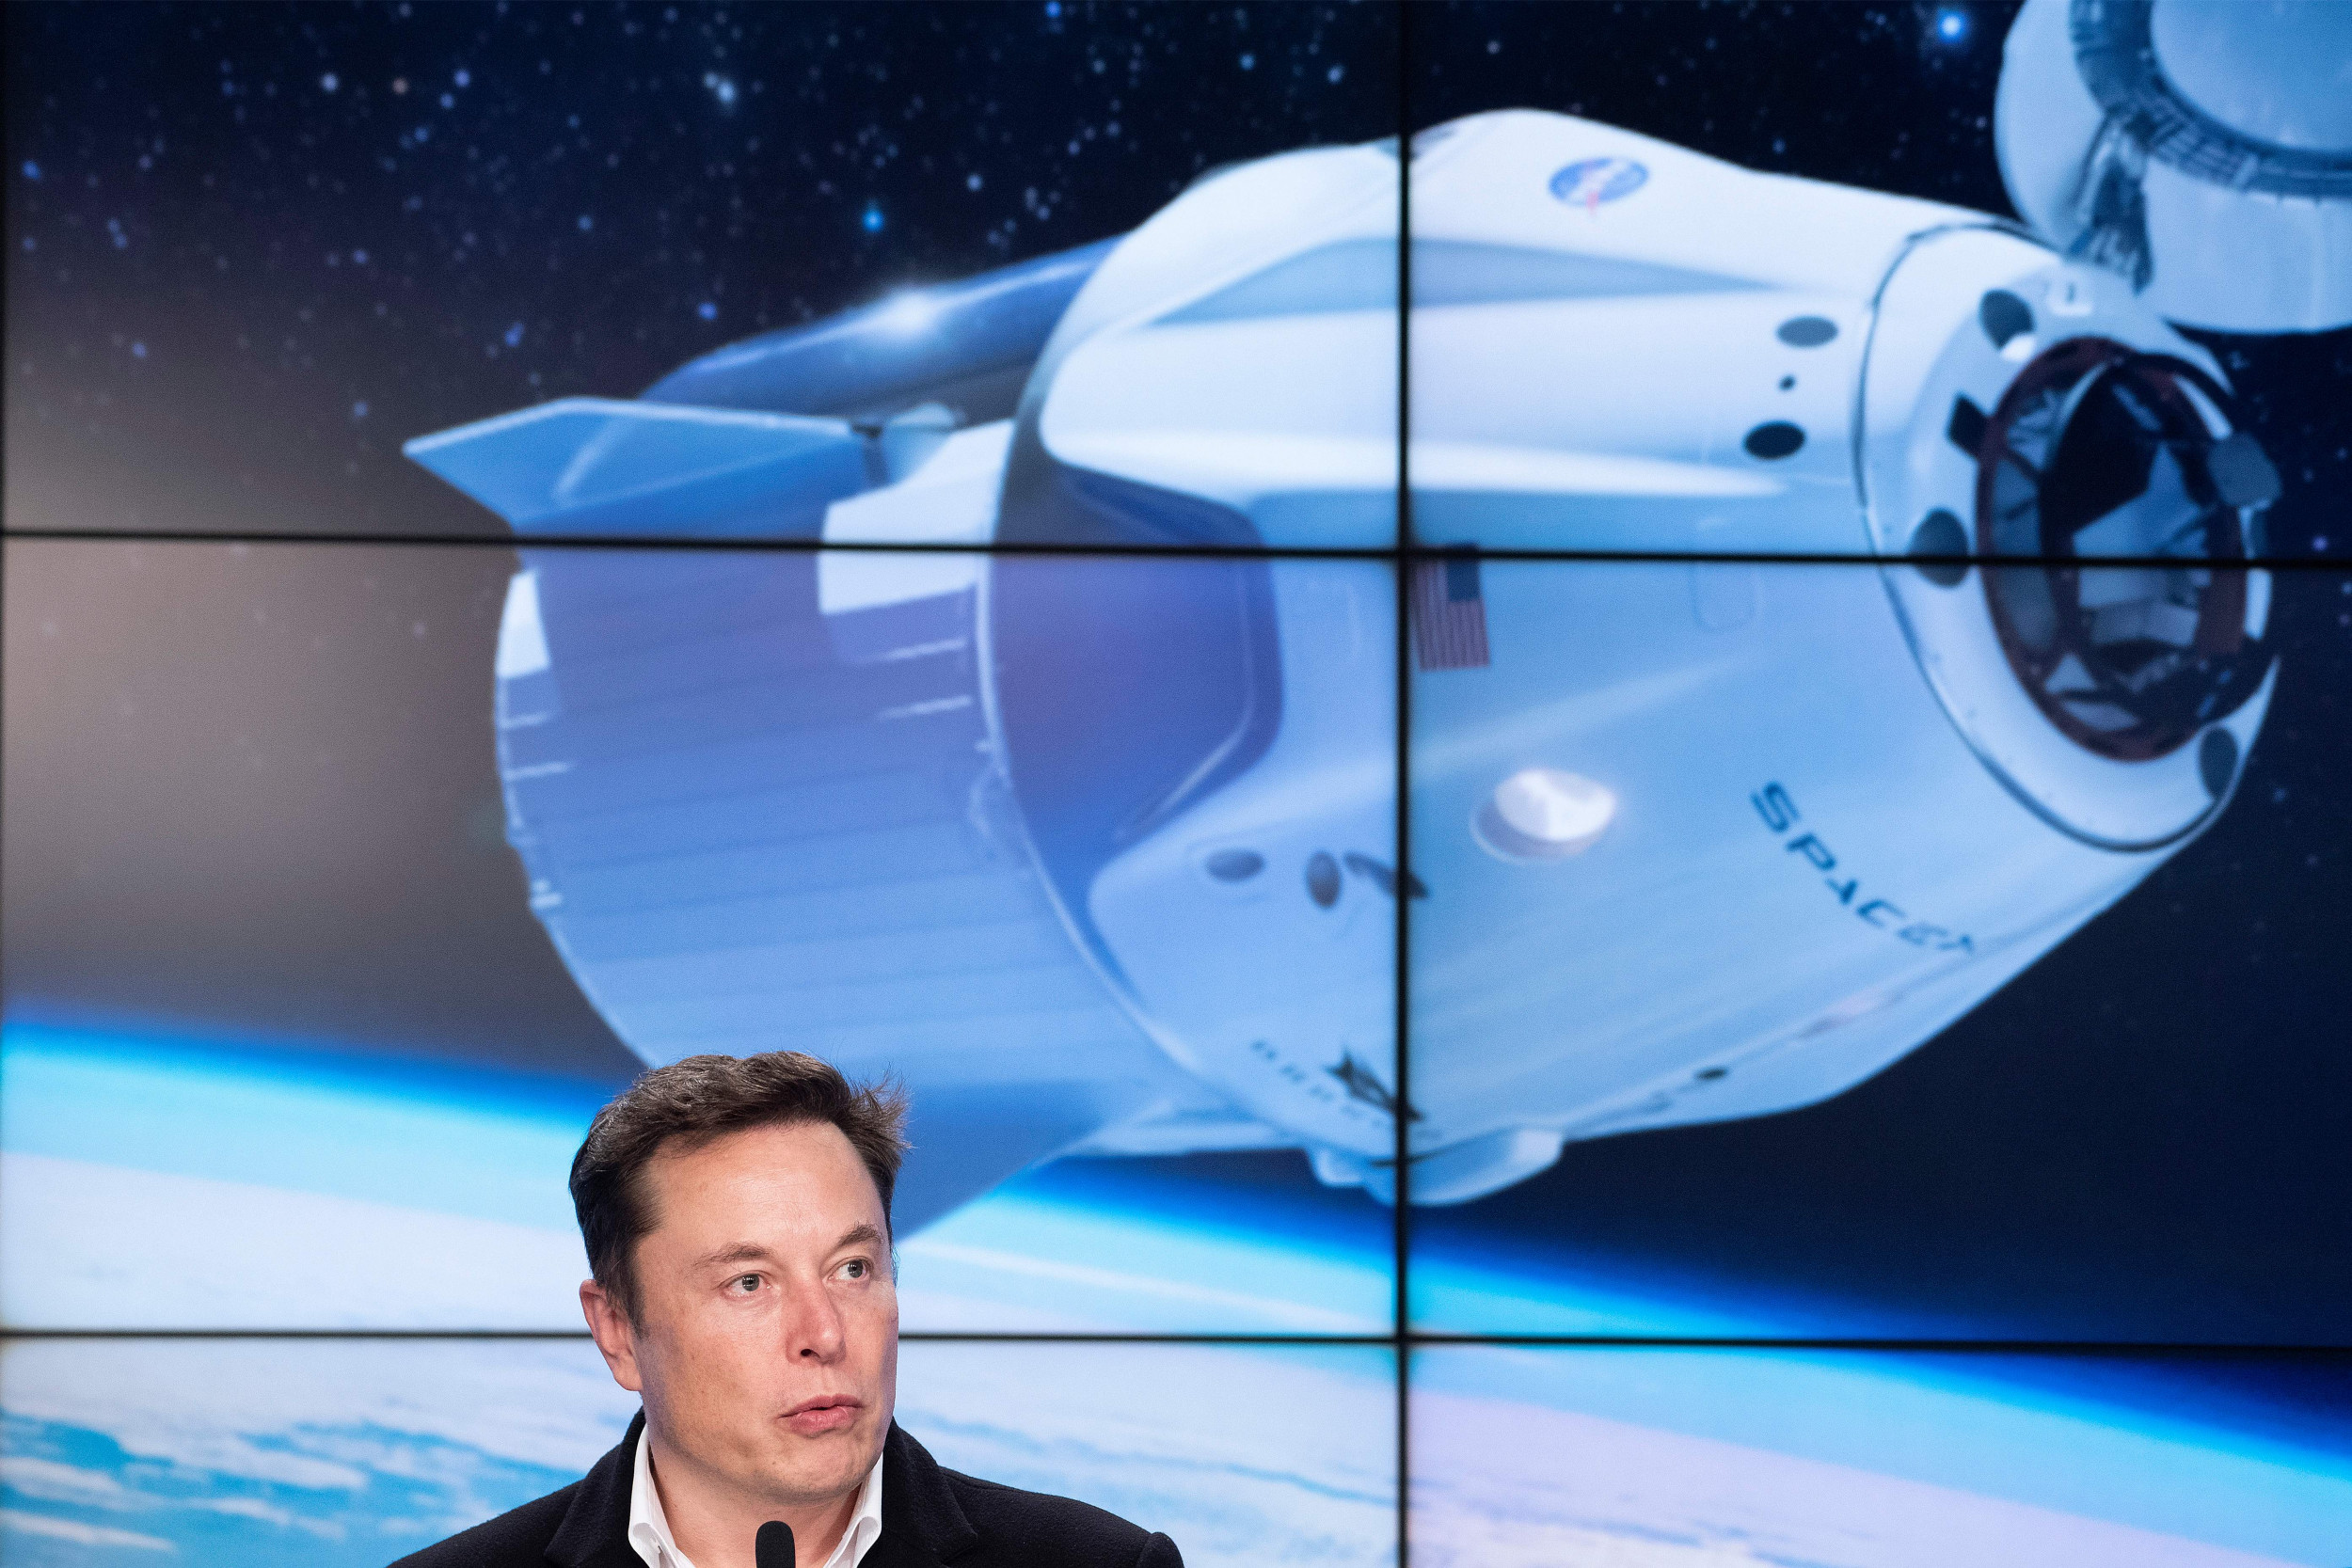 Light From Elon Musk's Starlink Satellites Ruins Space ...